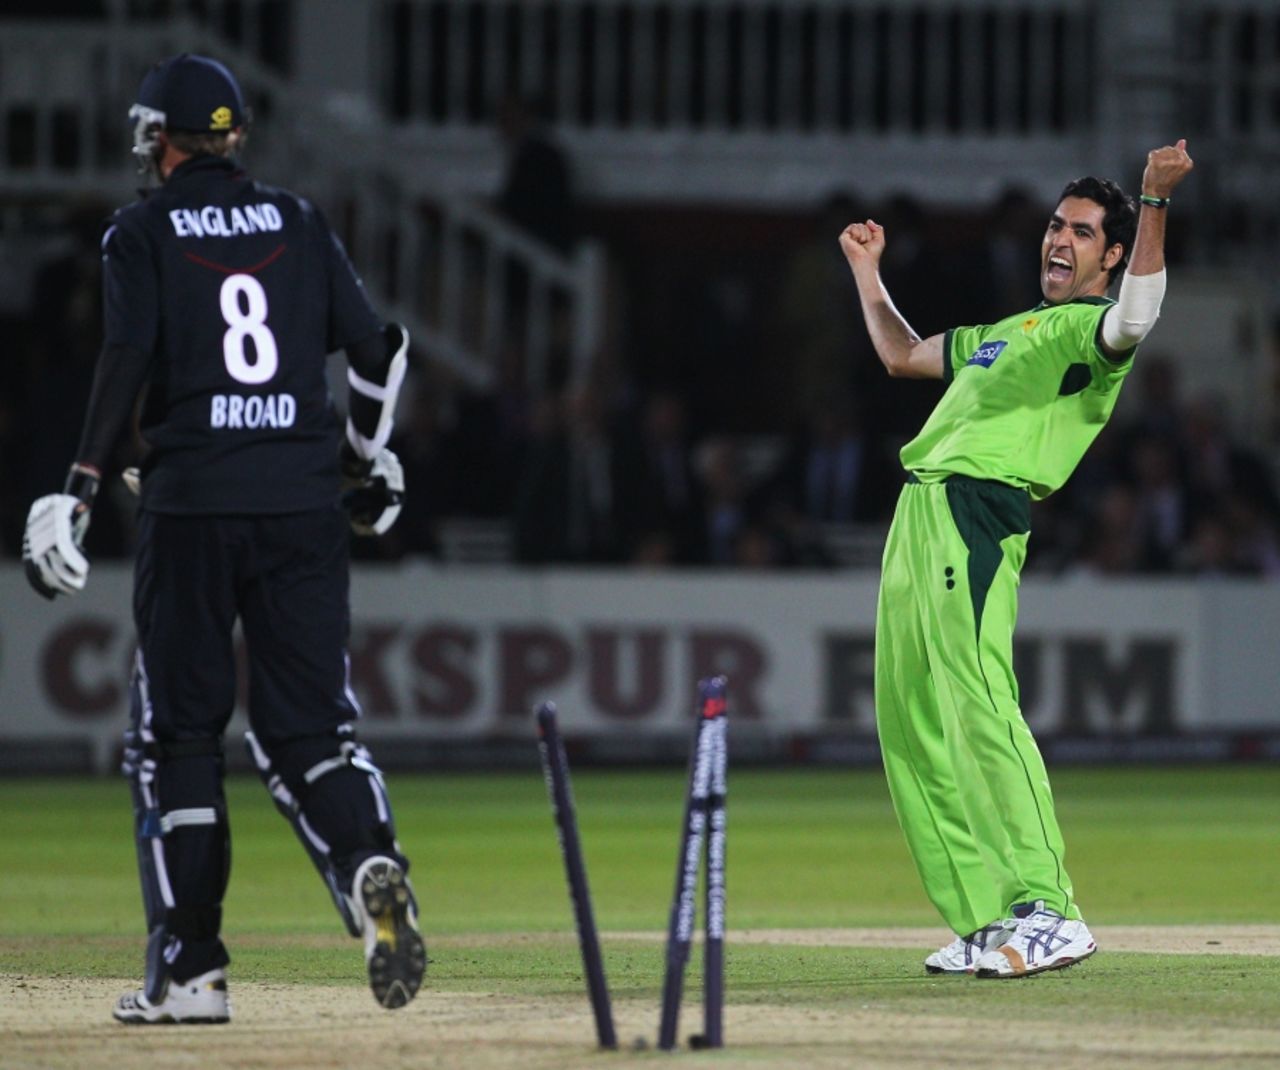 Umar Gul bowled Stuart Broad to seal the match for Pakistan and level the series, England v Pakistan, 4th ODI, Lord's, September 20, 2010